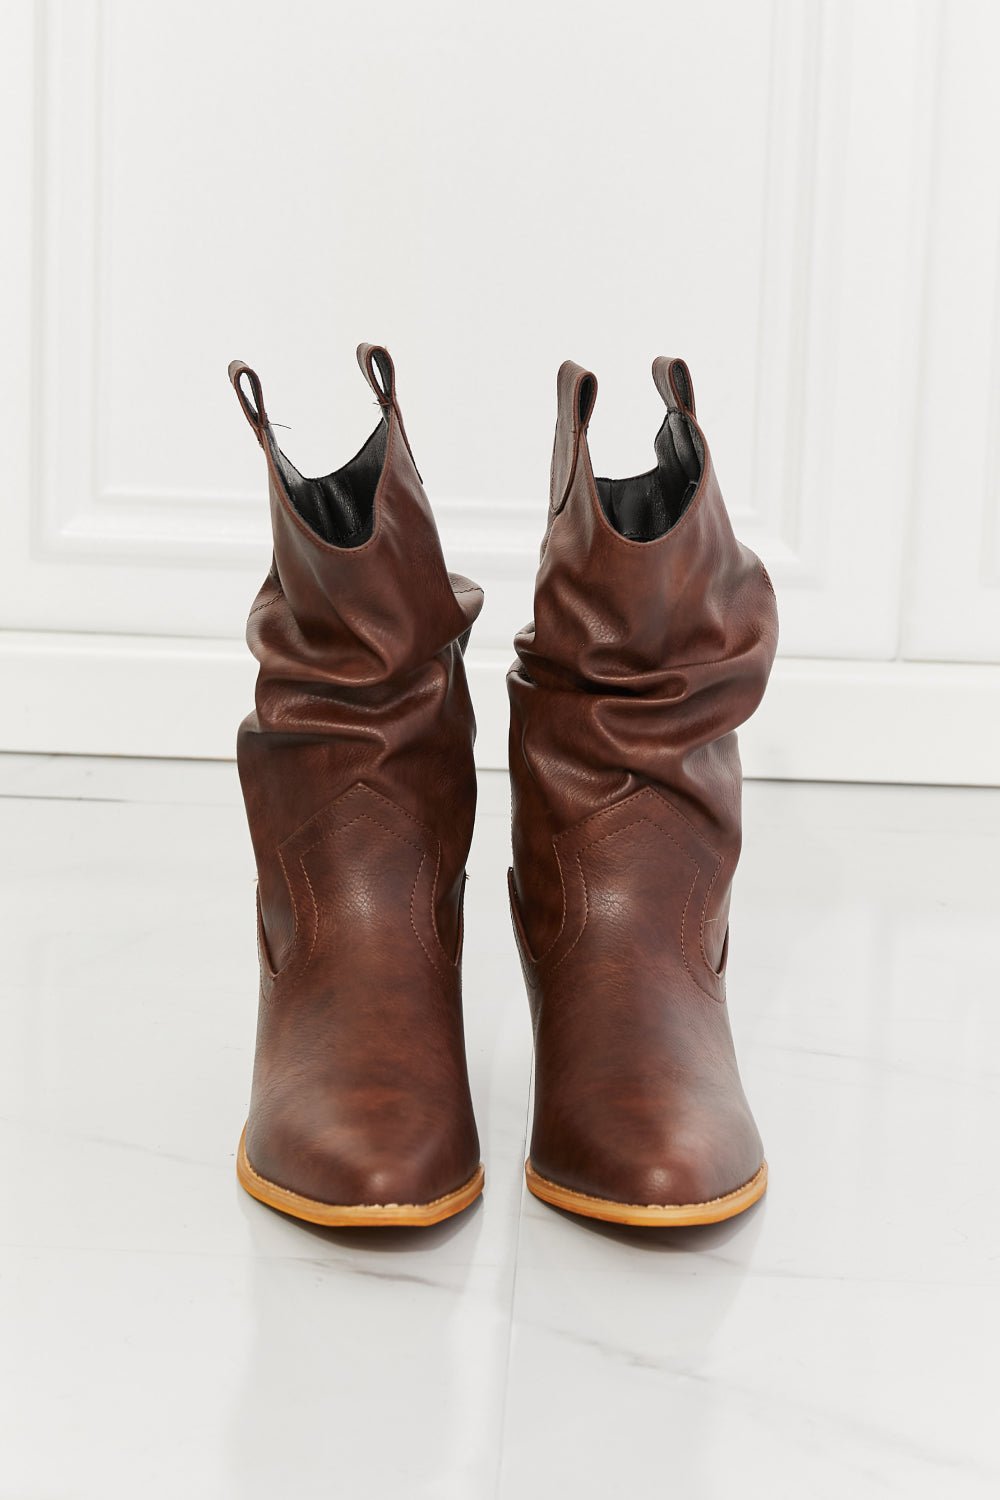 Vegan Leather Scrunch Cowgirl Boots in Burnt UmberCowboy BootsMelody